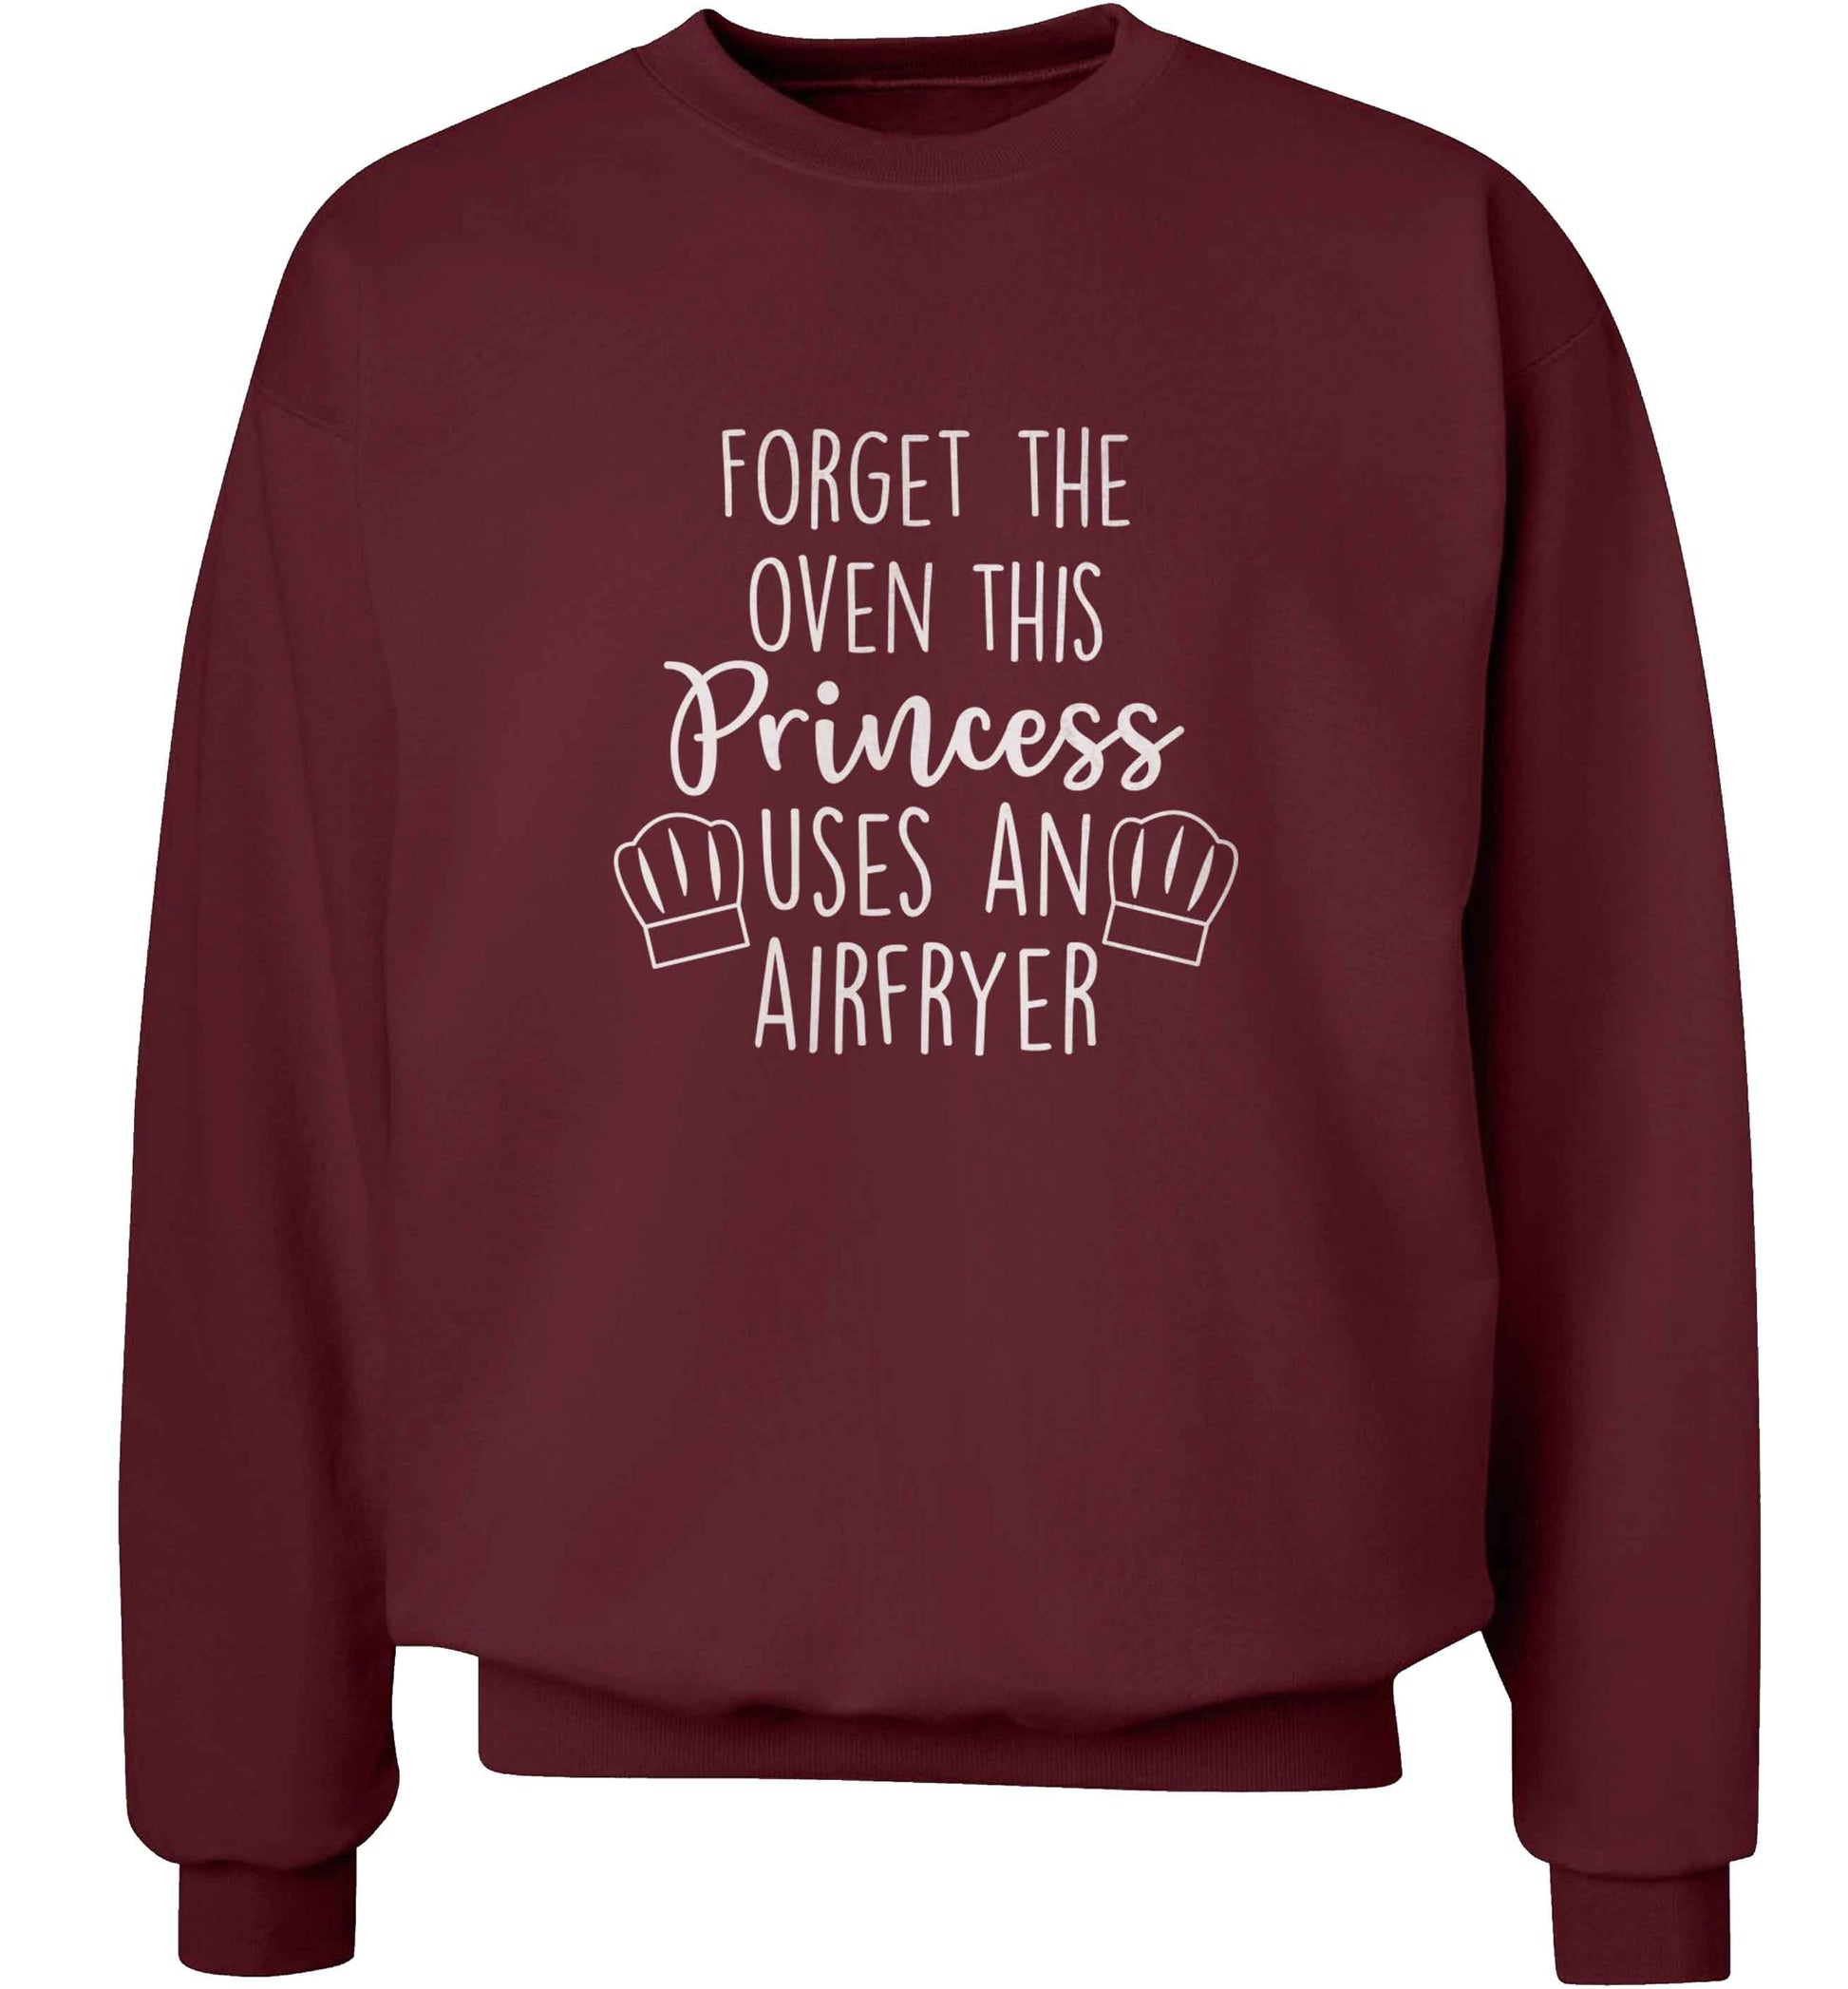 Forget the oven this princess uses an airfryeradult's unisex maroon sweater 2XL